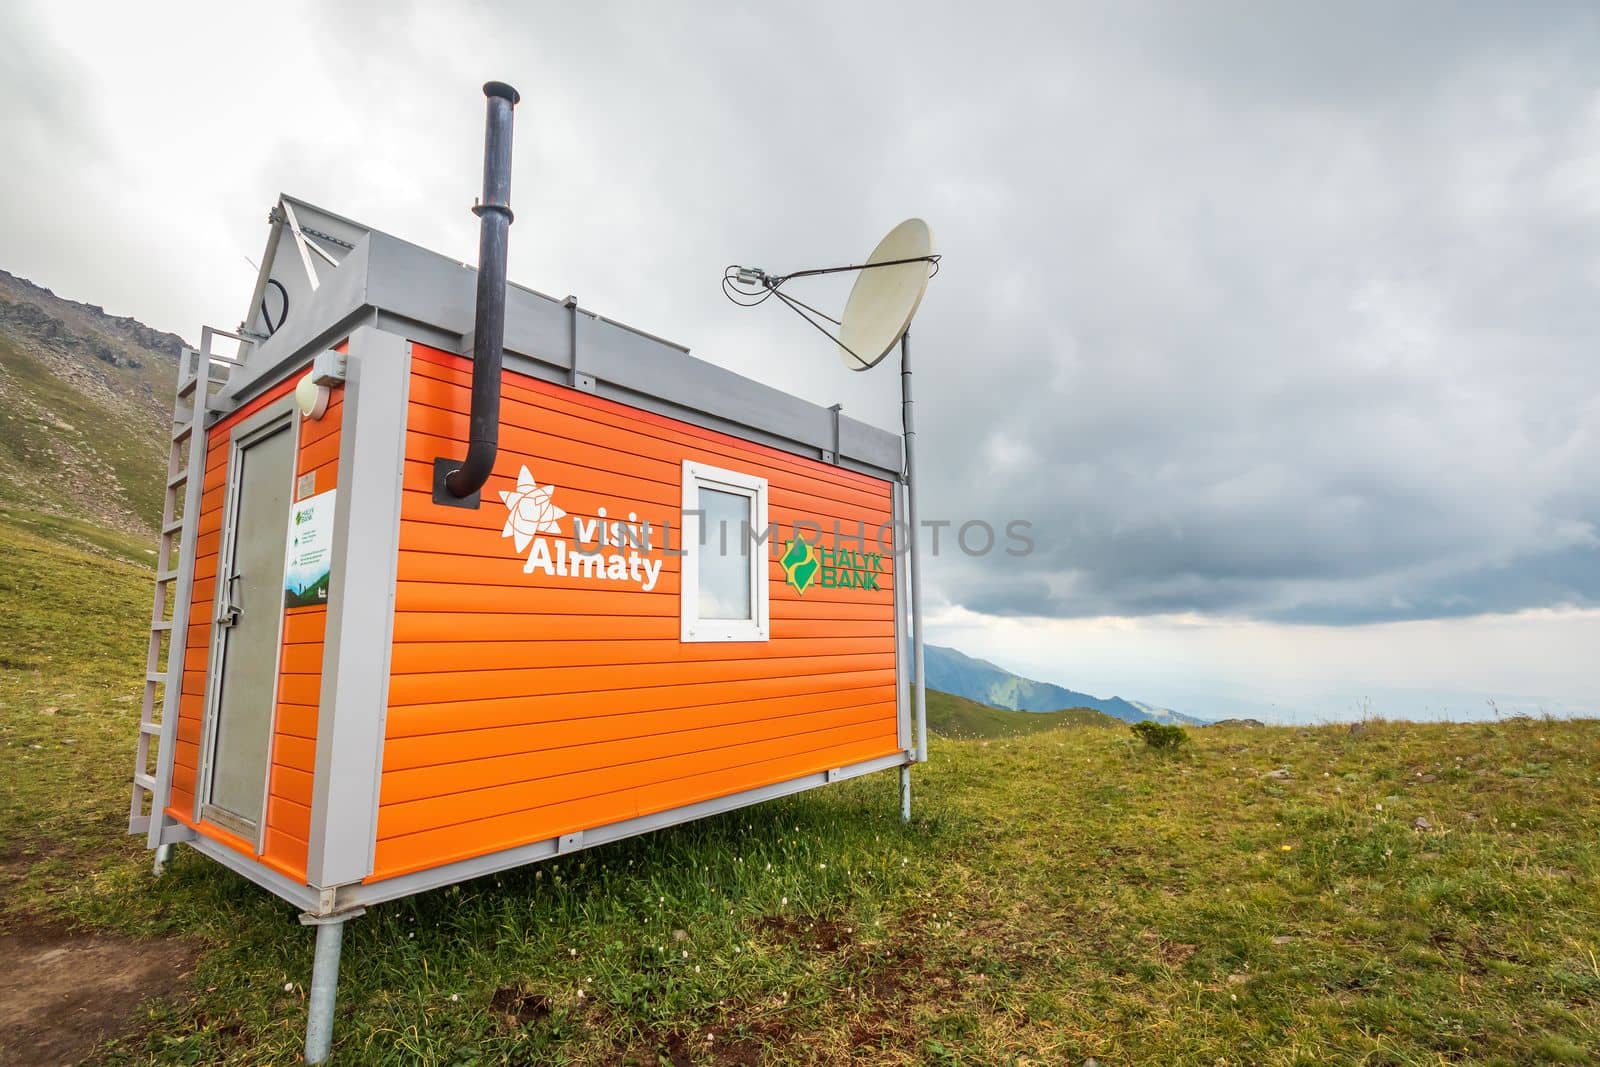 A mobile building of a collapsible type, built on top of the Almaty Mountains for emergency situations of tourists. Almaty, Kazakhstan - July 19, 2022